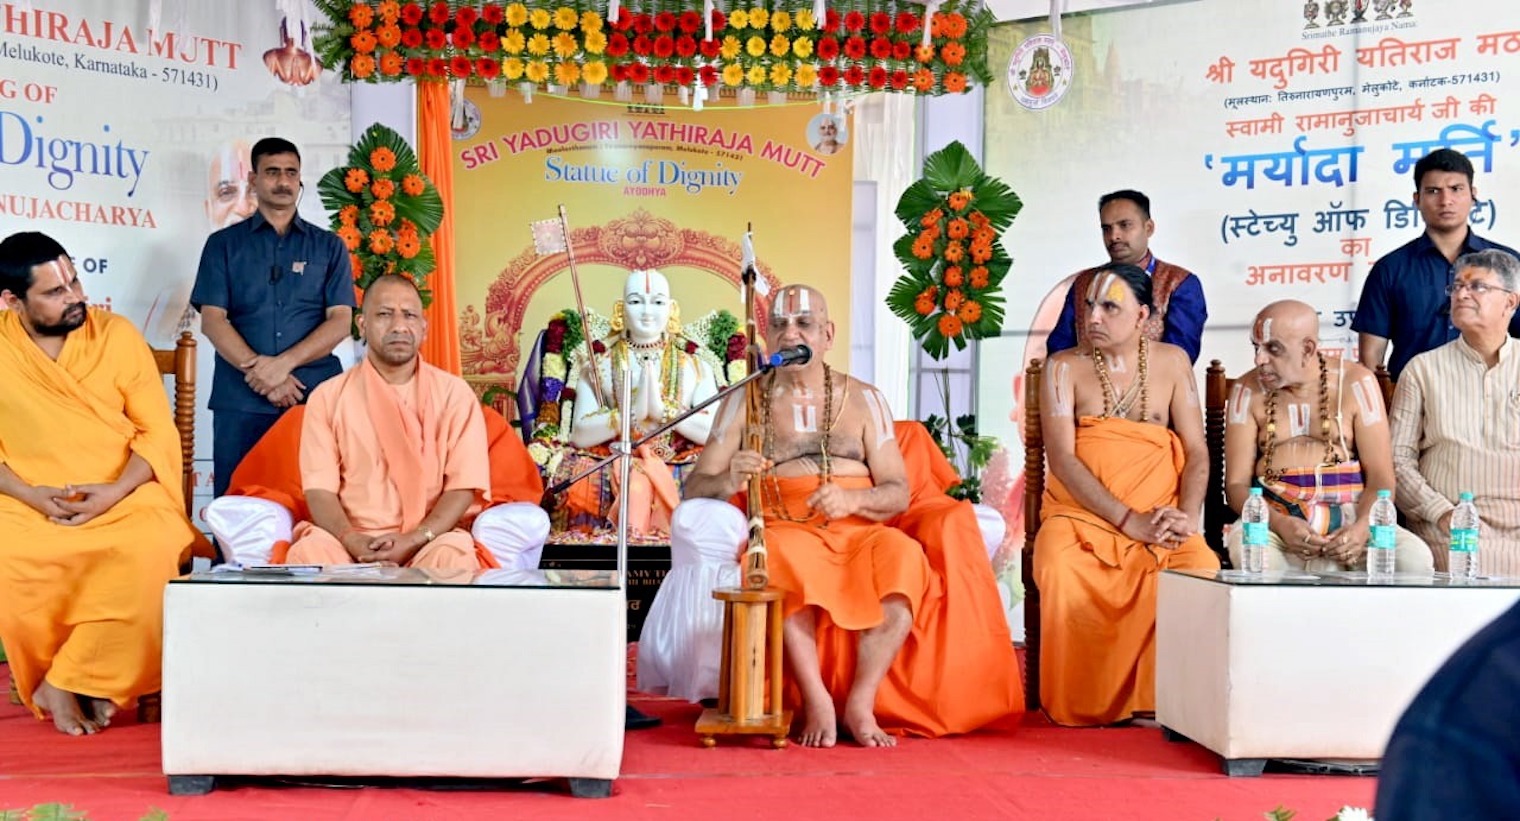 CM unveils Statue of Dignity of Sant Ramanujacharya in Ayodhya